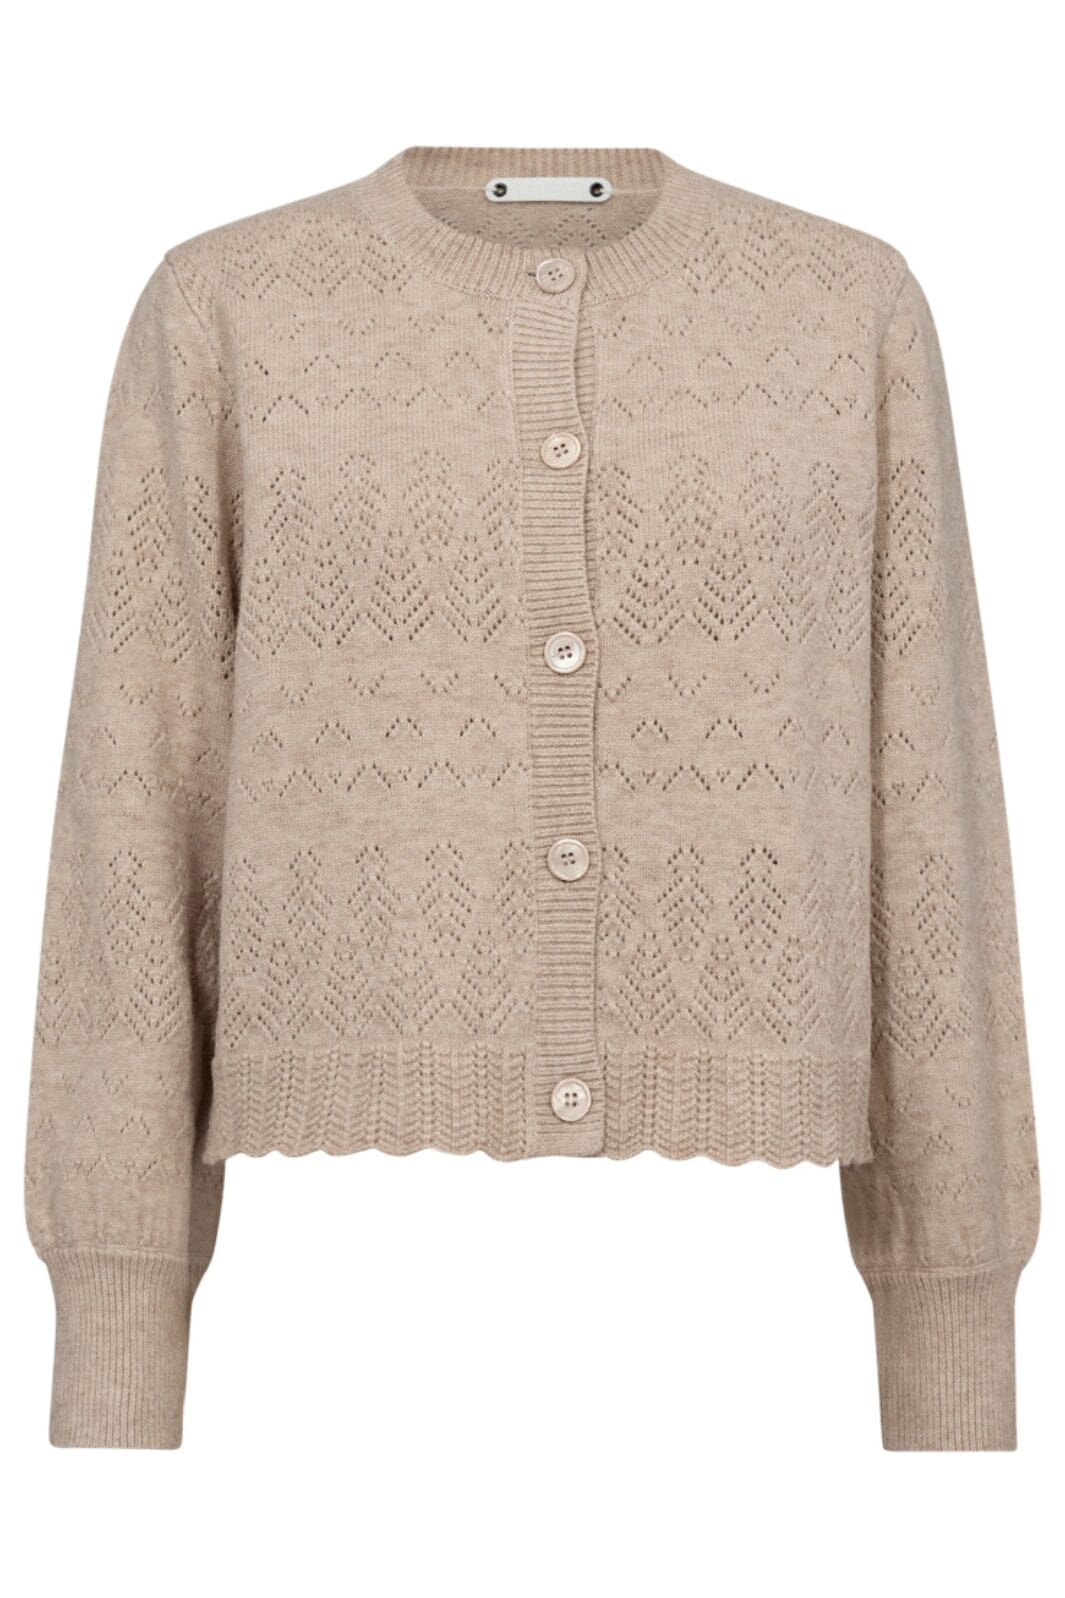 Co´couture - Rowcc Pointelle Puff Cardigan 32152 - 11 Off White Cardigans 